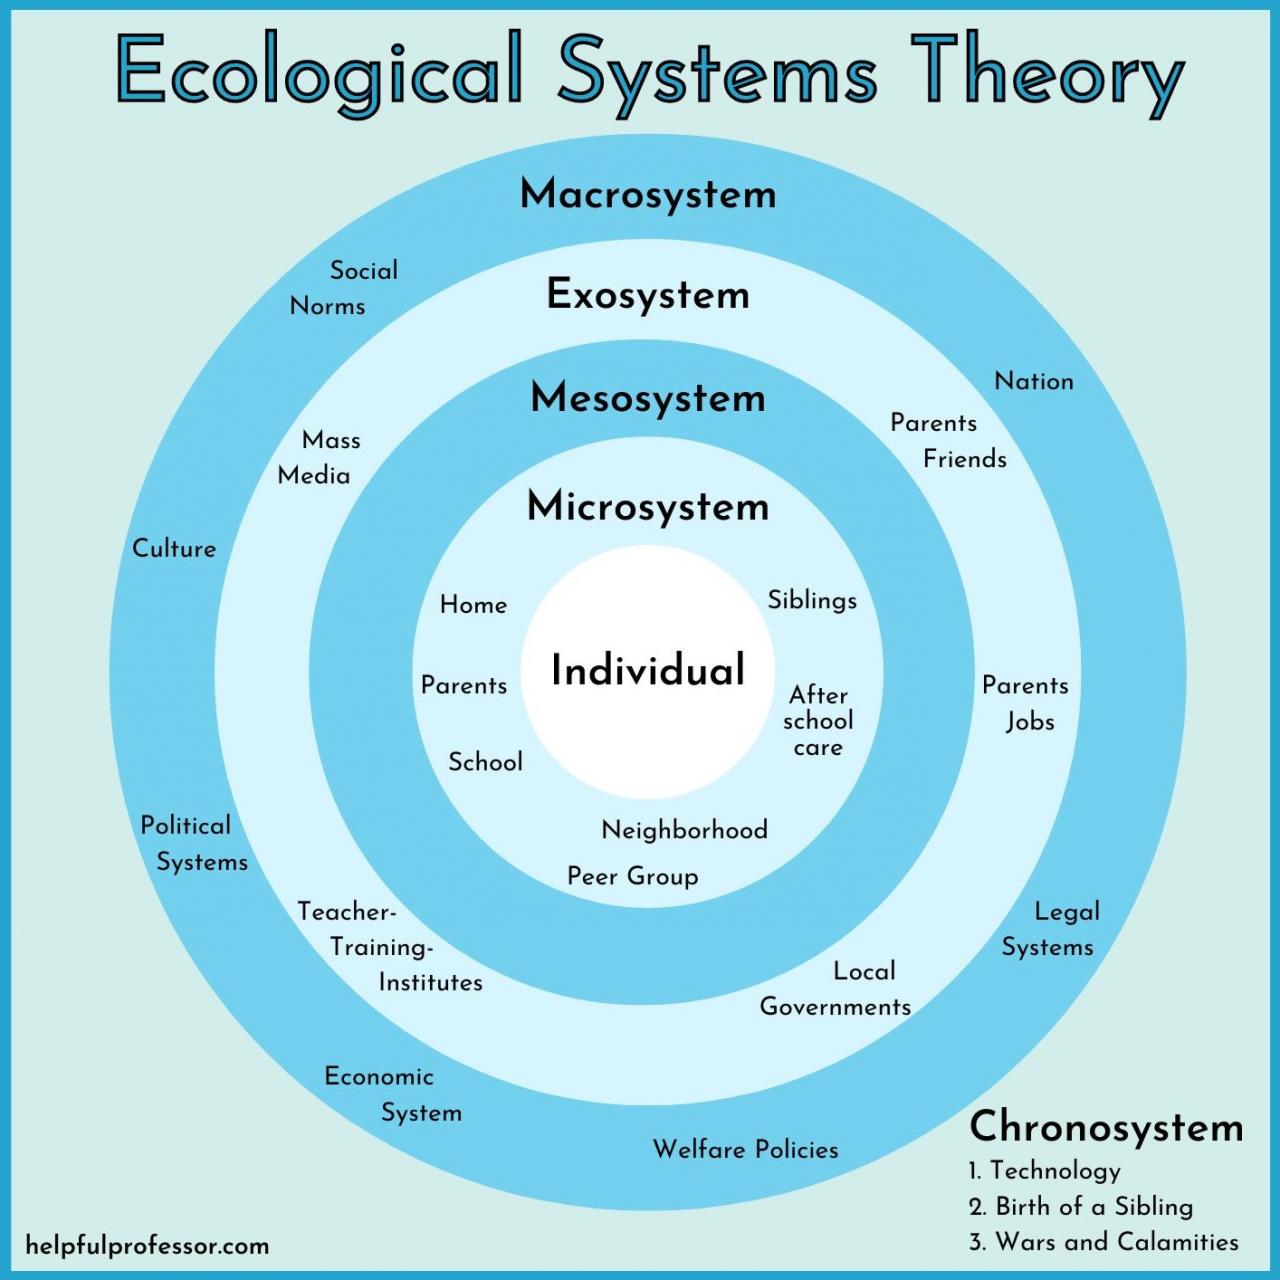 A systems analysis of an ecosystem could involve